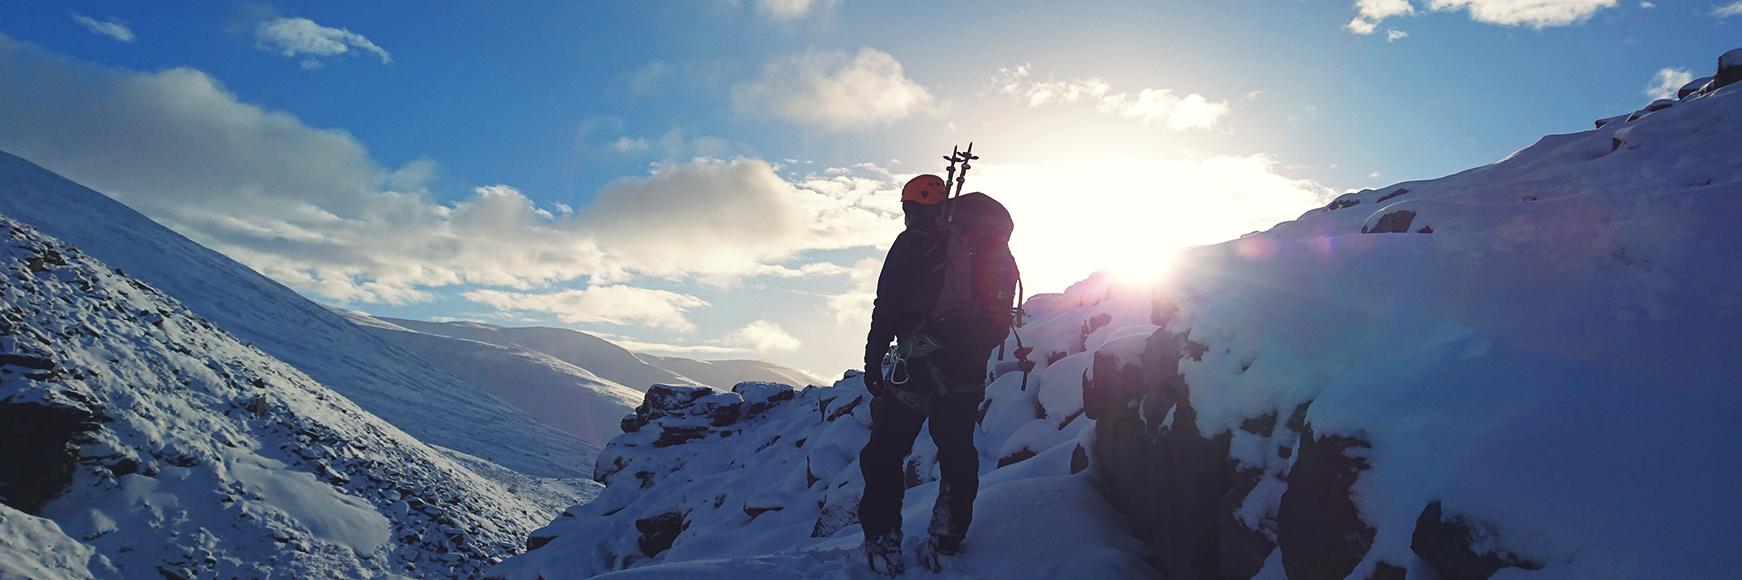 Get started with mountaineering in the Cairngorms banner image